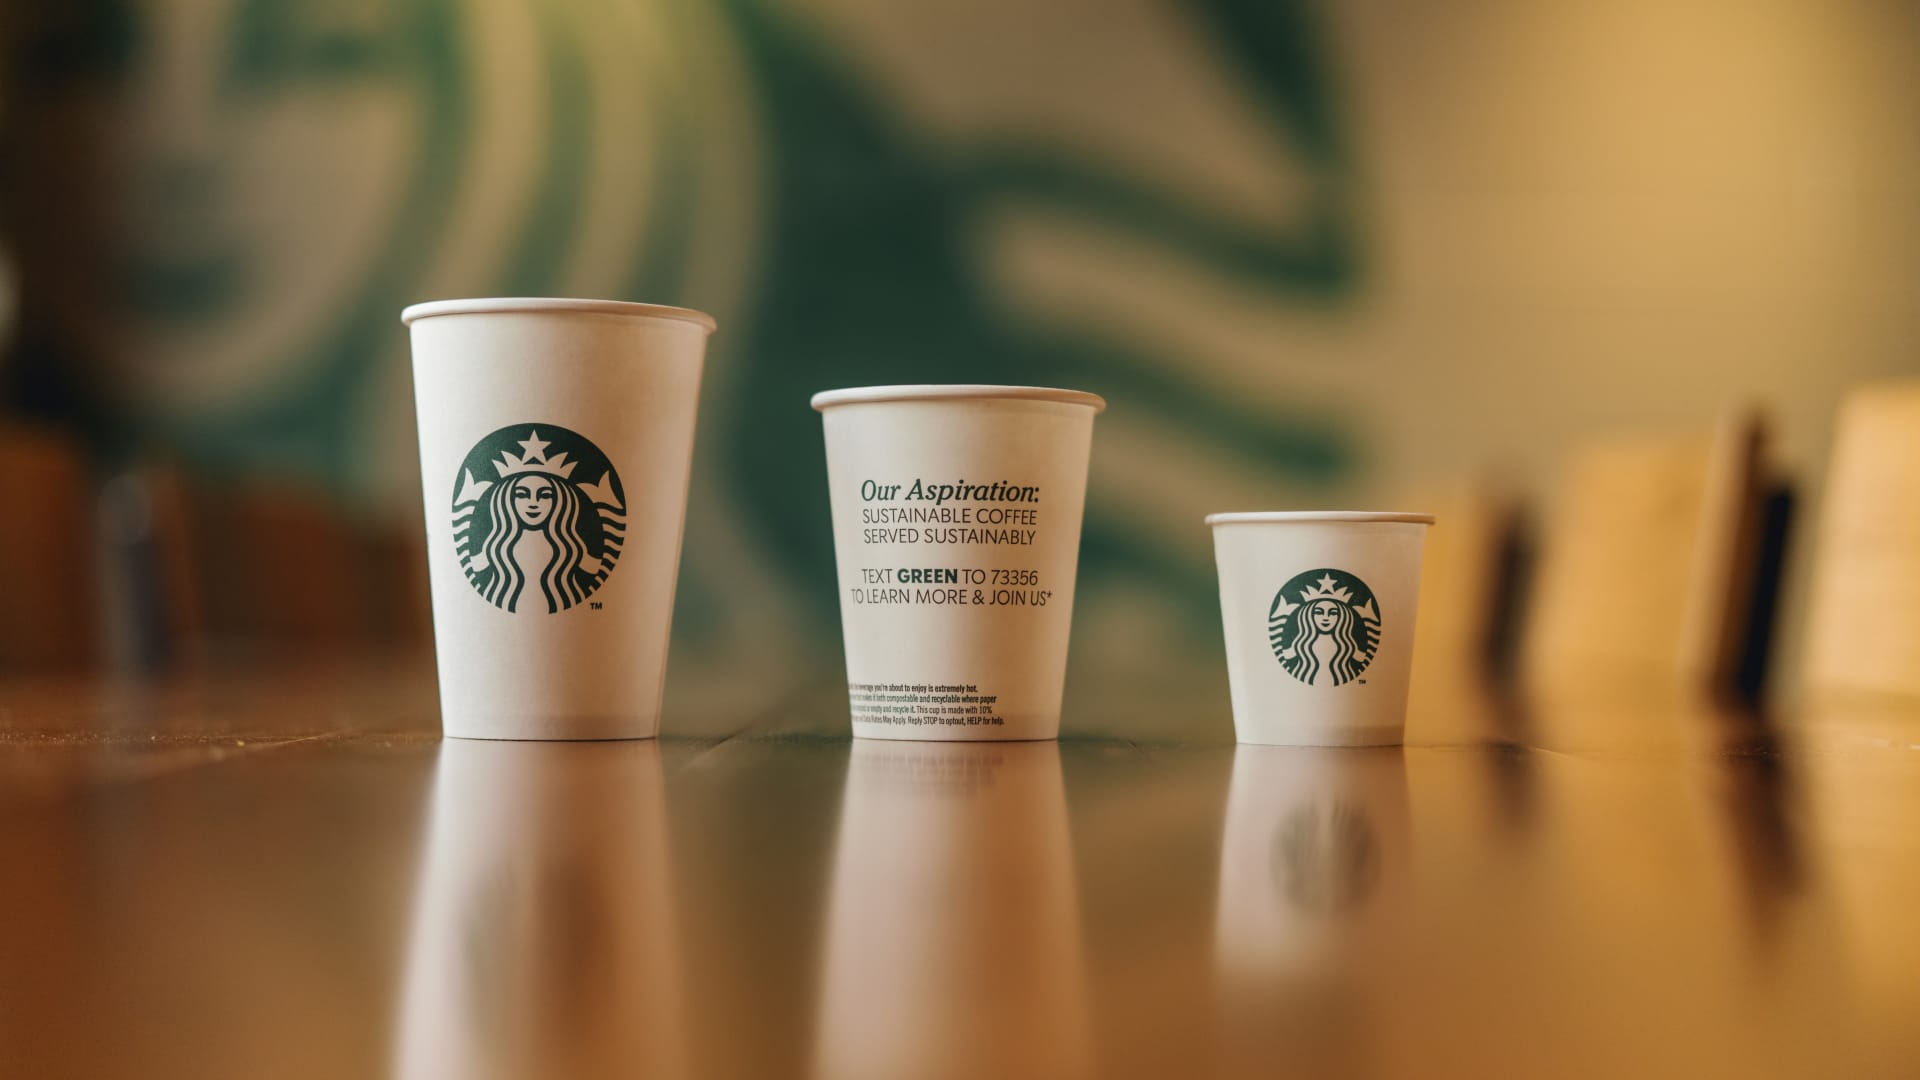 Starbucks New No Straw Policy Worse For Environment